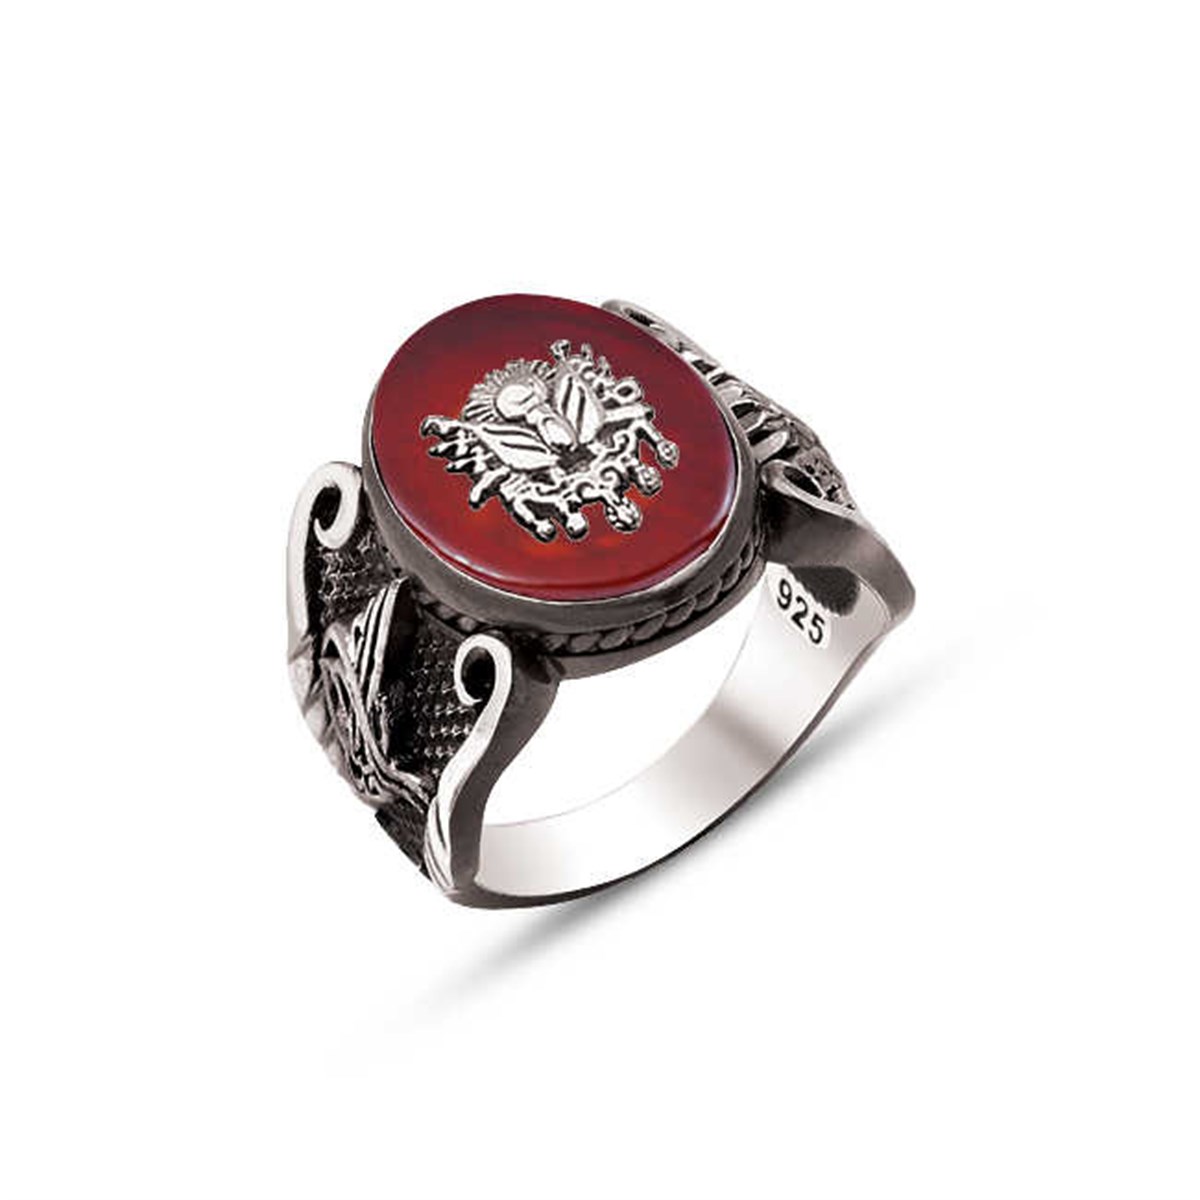 Silver Agate Stone Top Crest Men's Ring